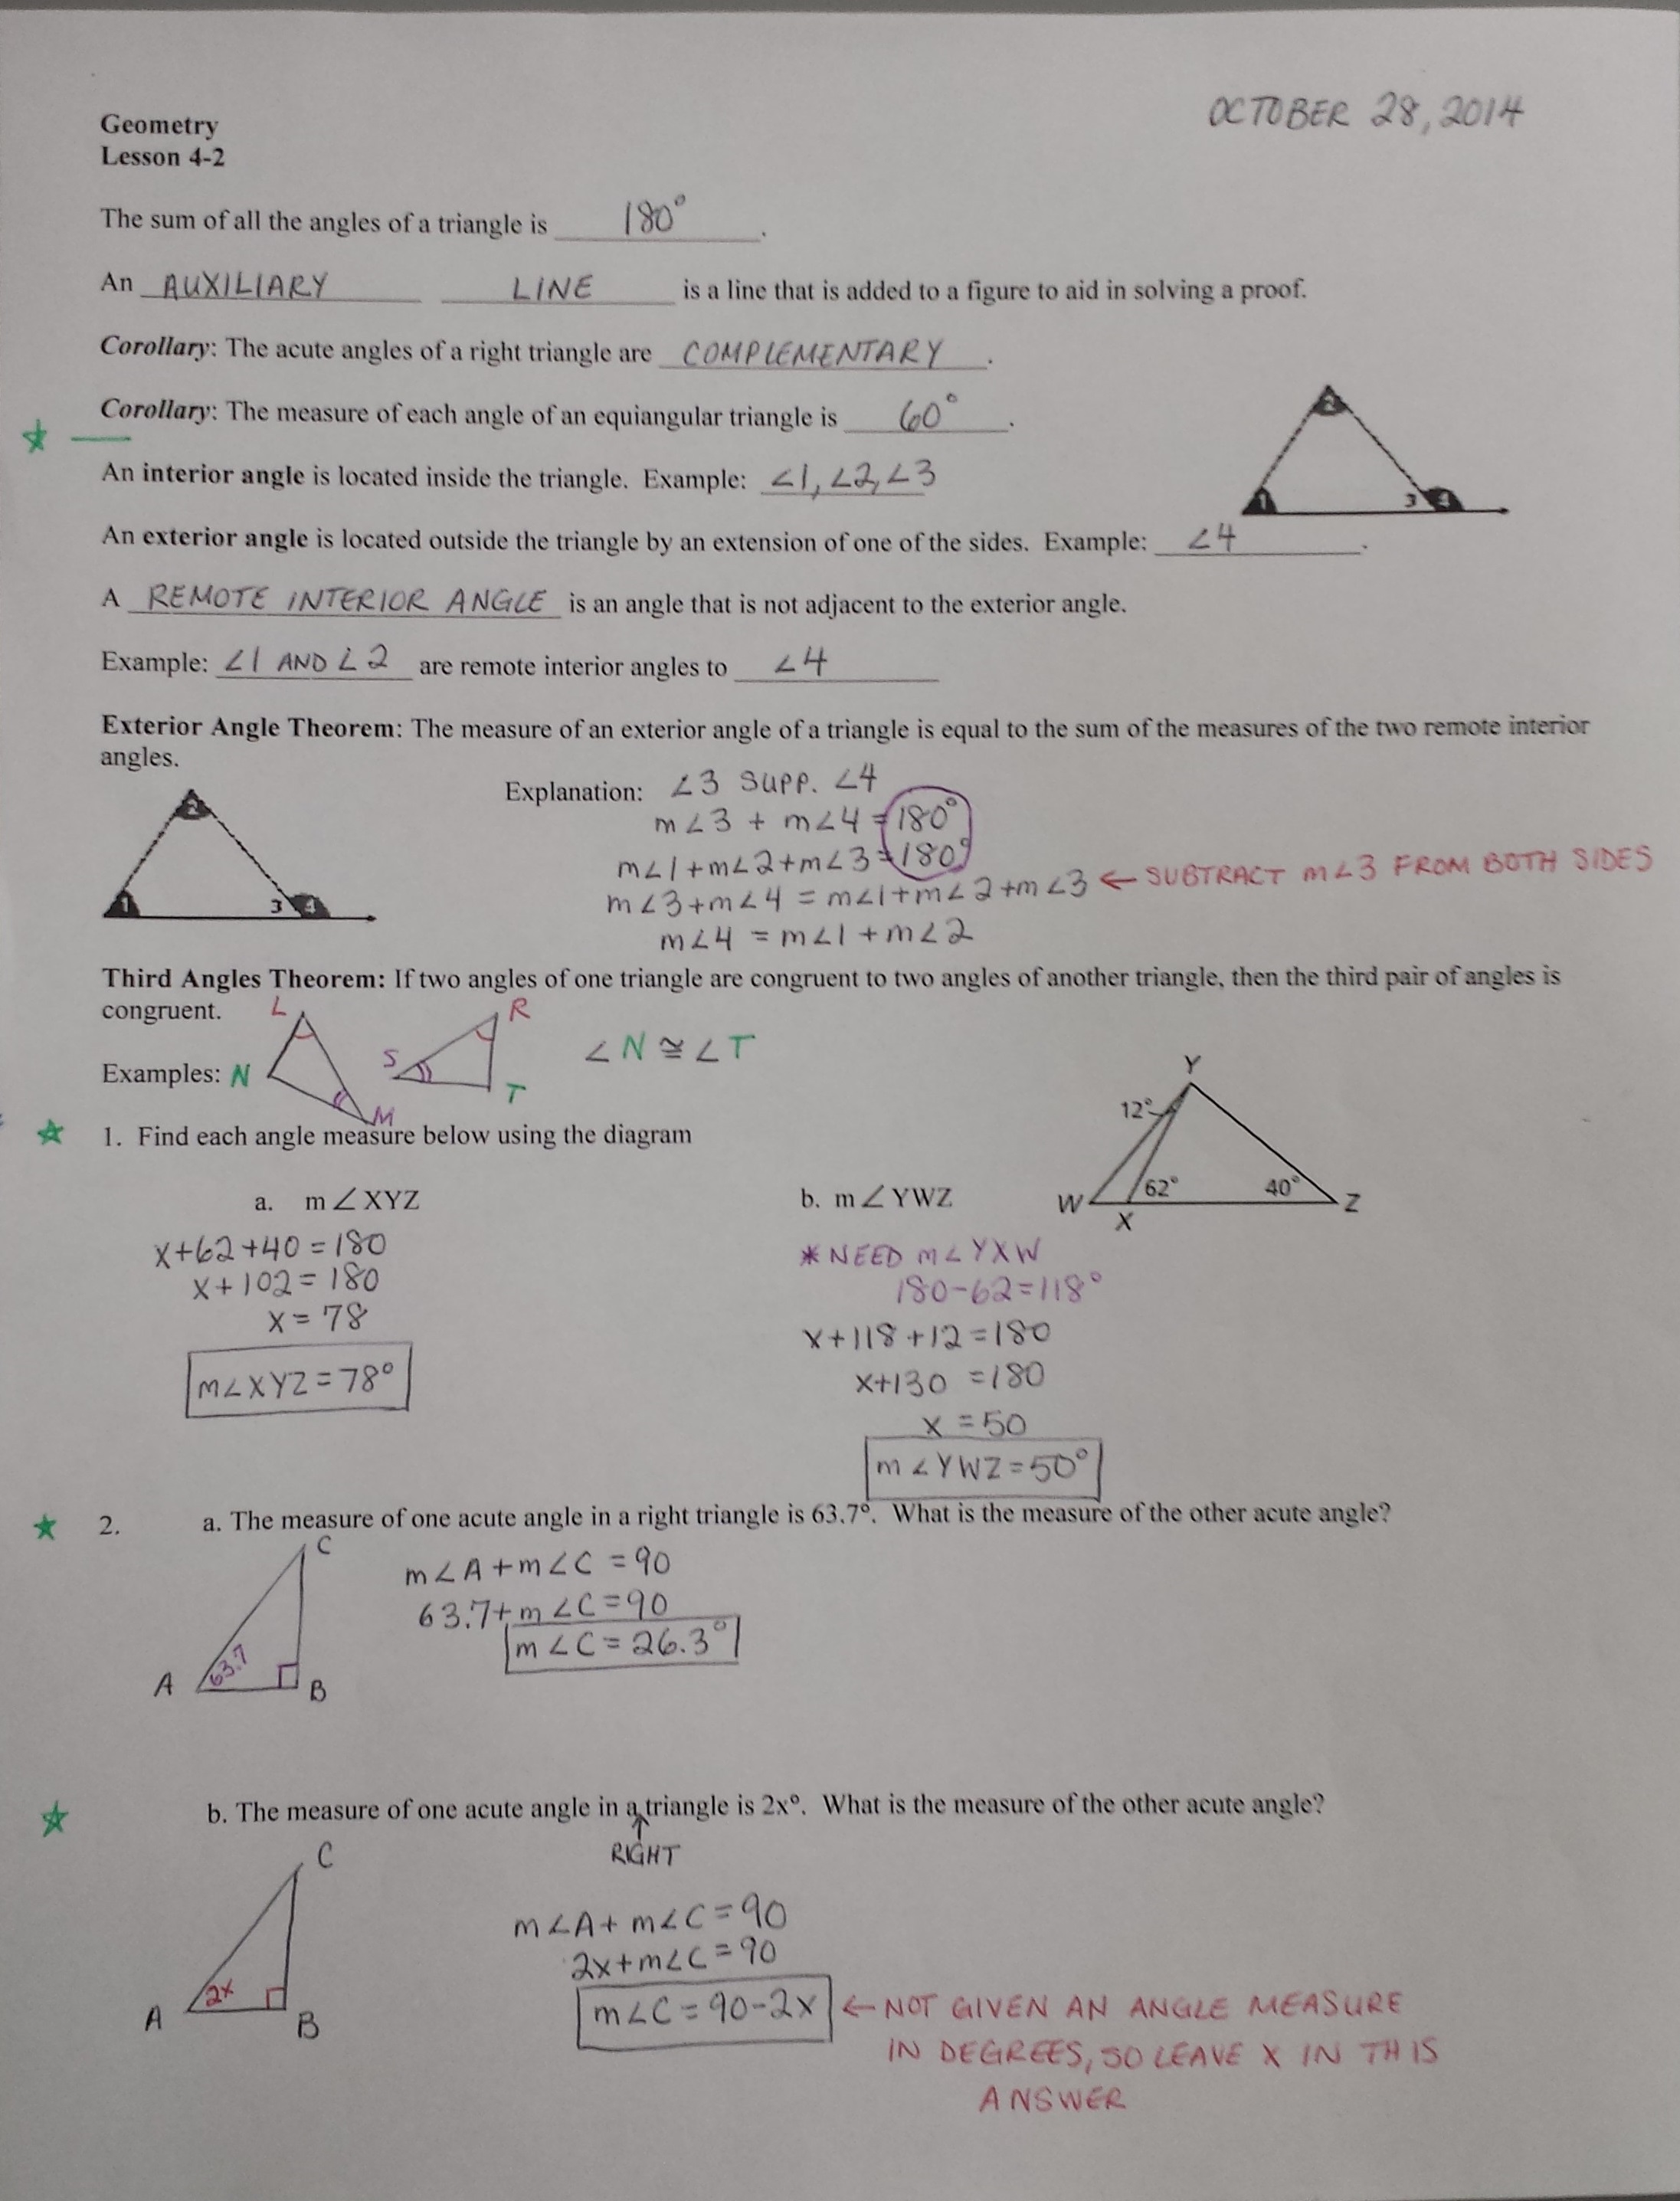 lesson-3-skills-practice-angles-of-triangles-answers